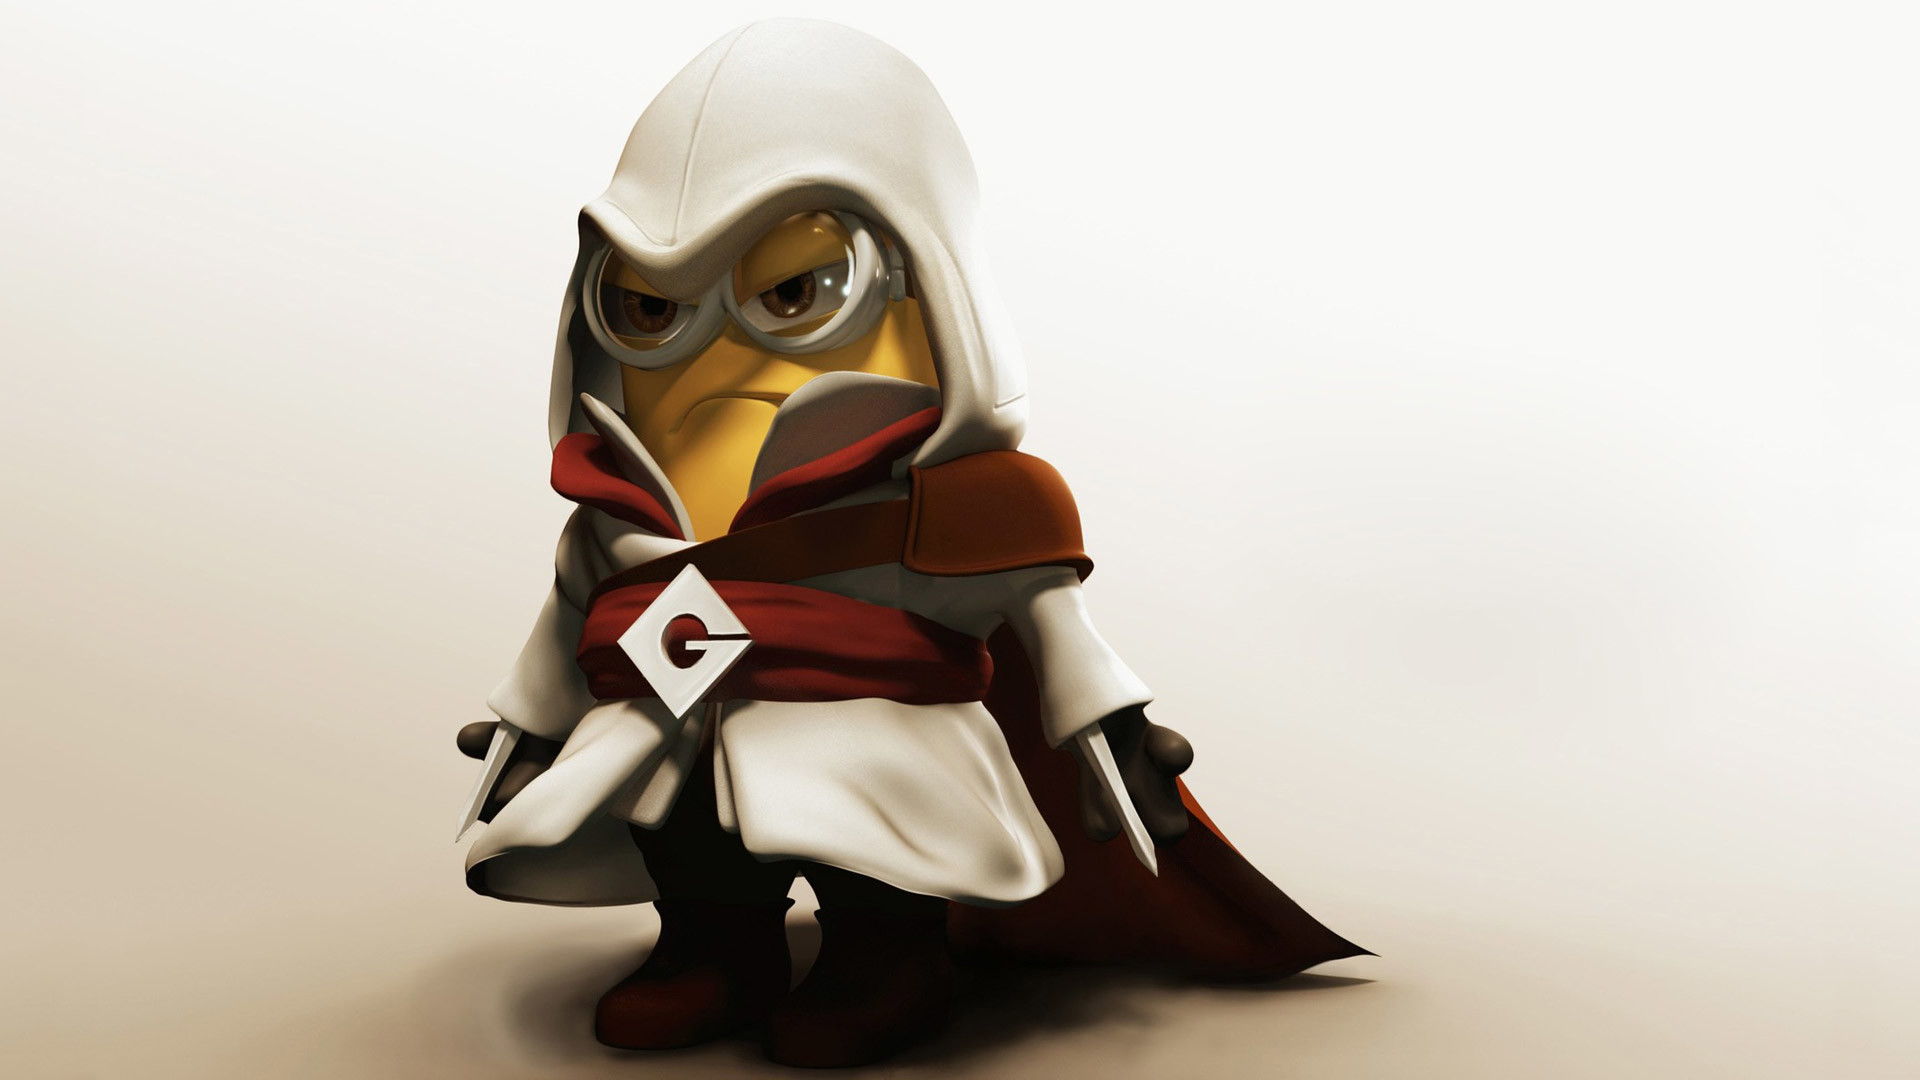 1920x1080 Free Assassin's Creed II Wallpaper in 